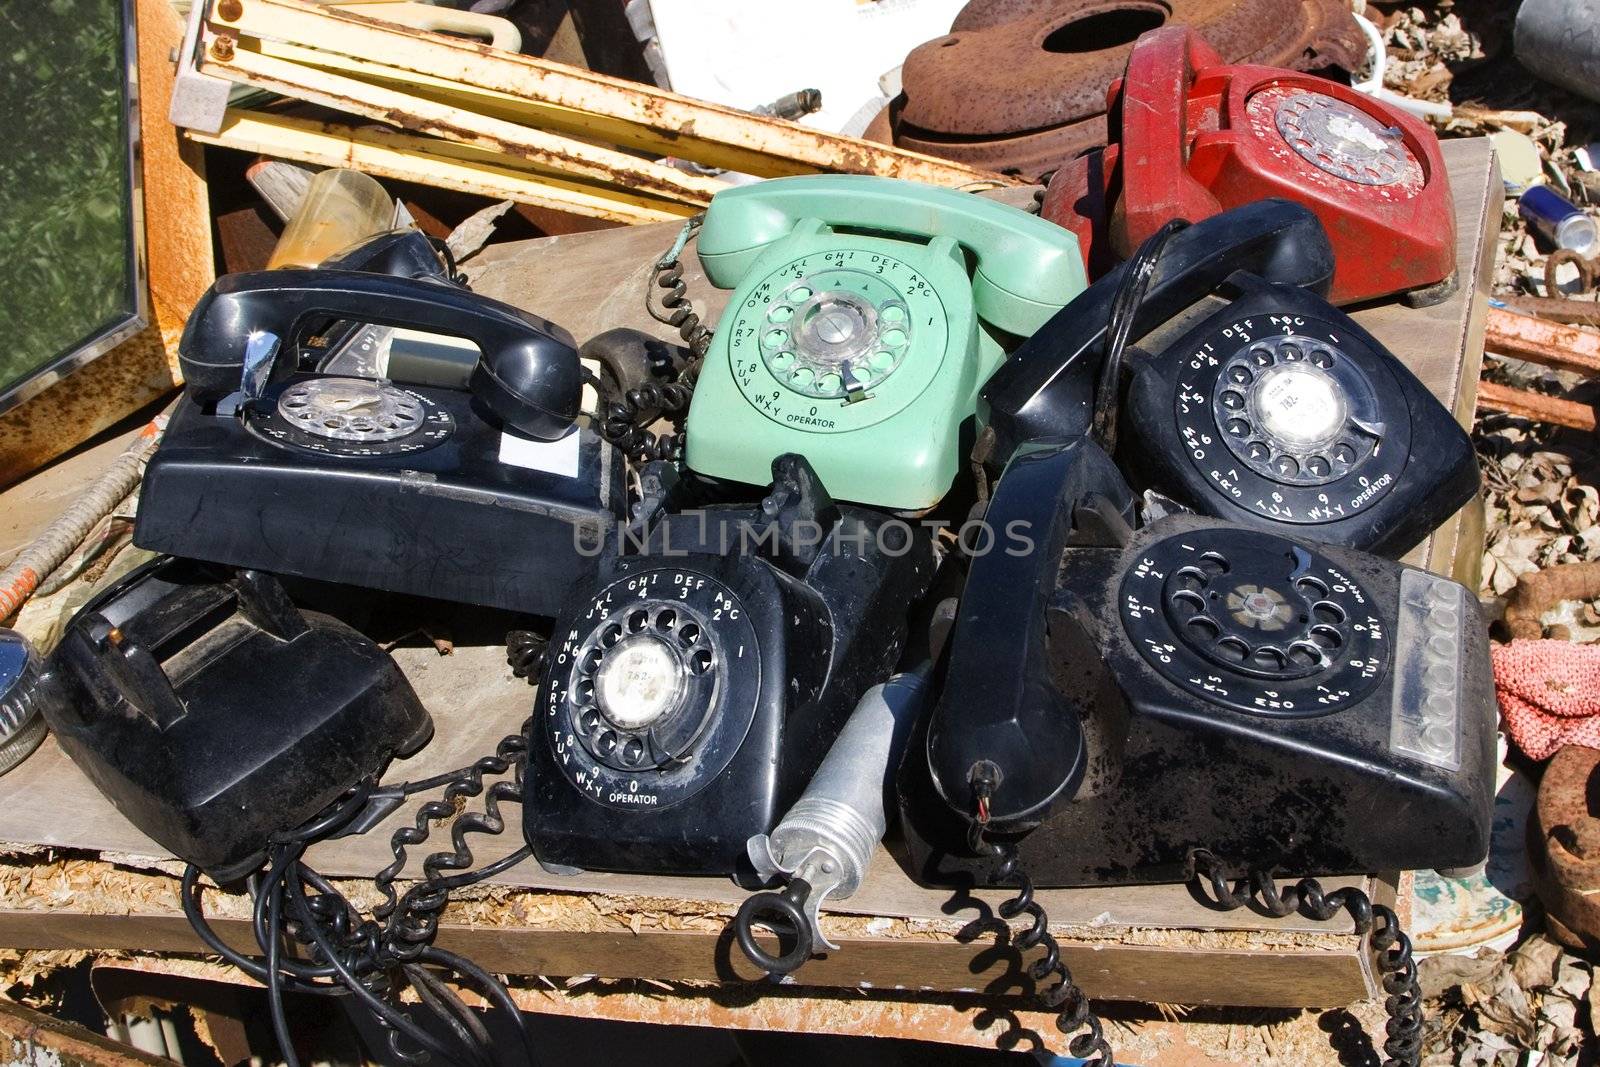 Stack of old broken rotary telephones on table.